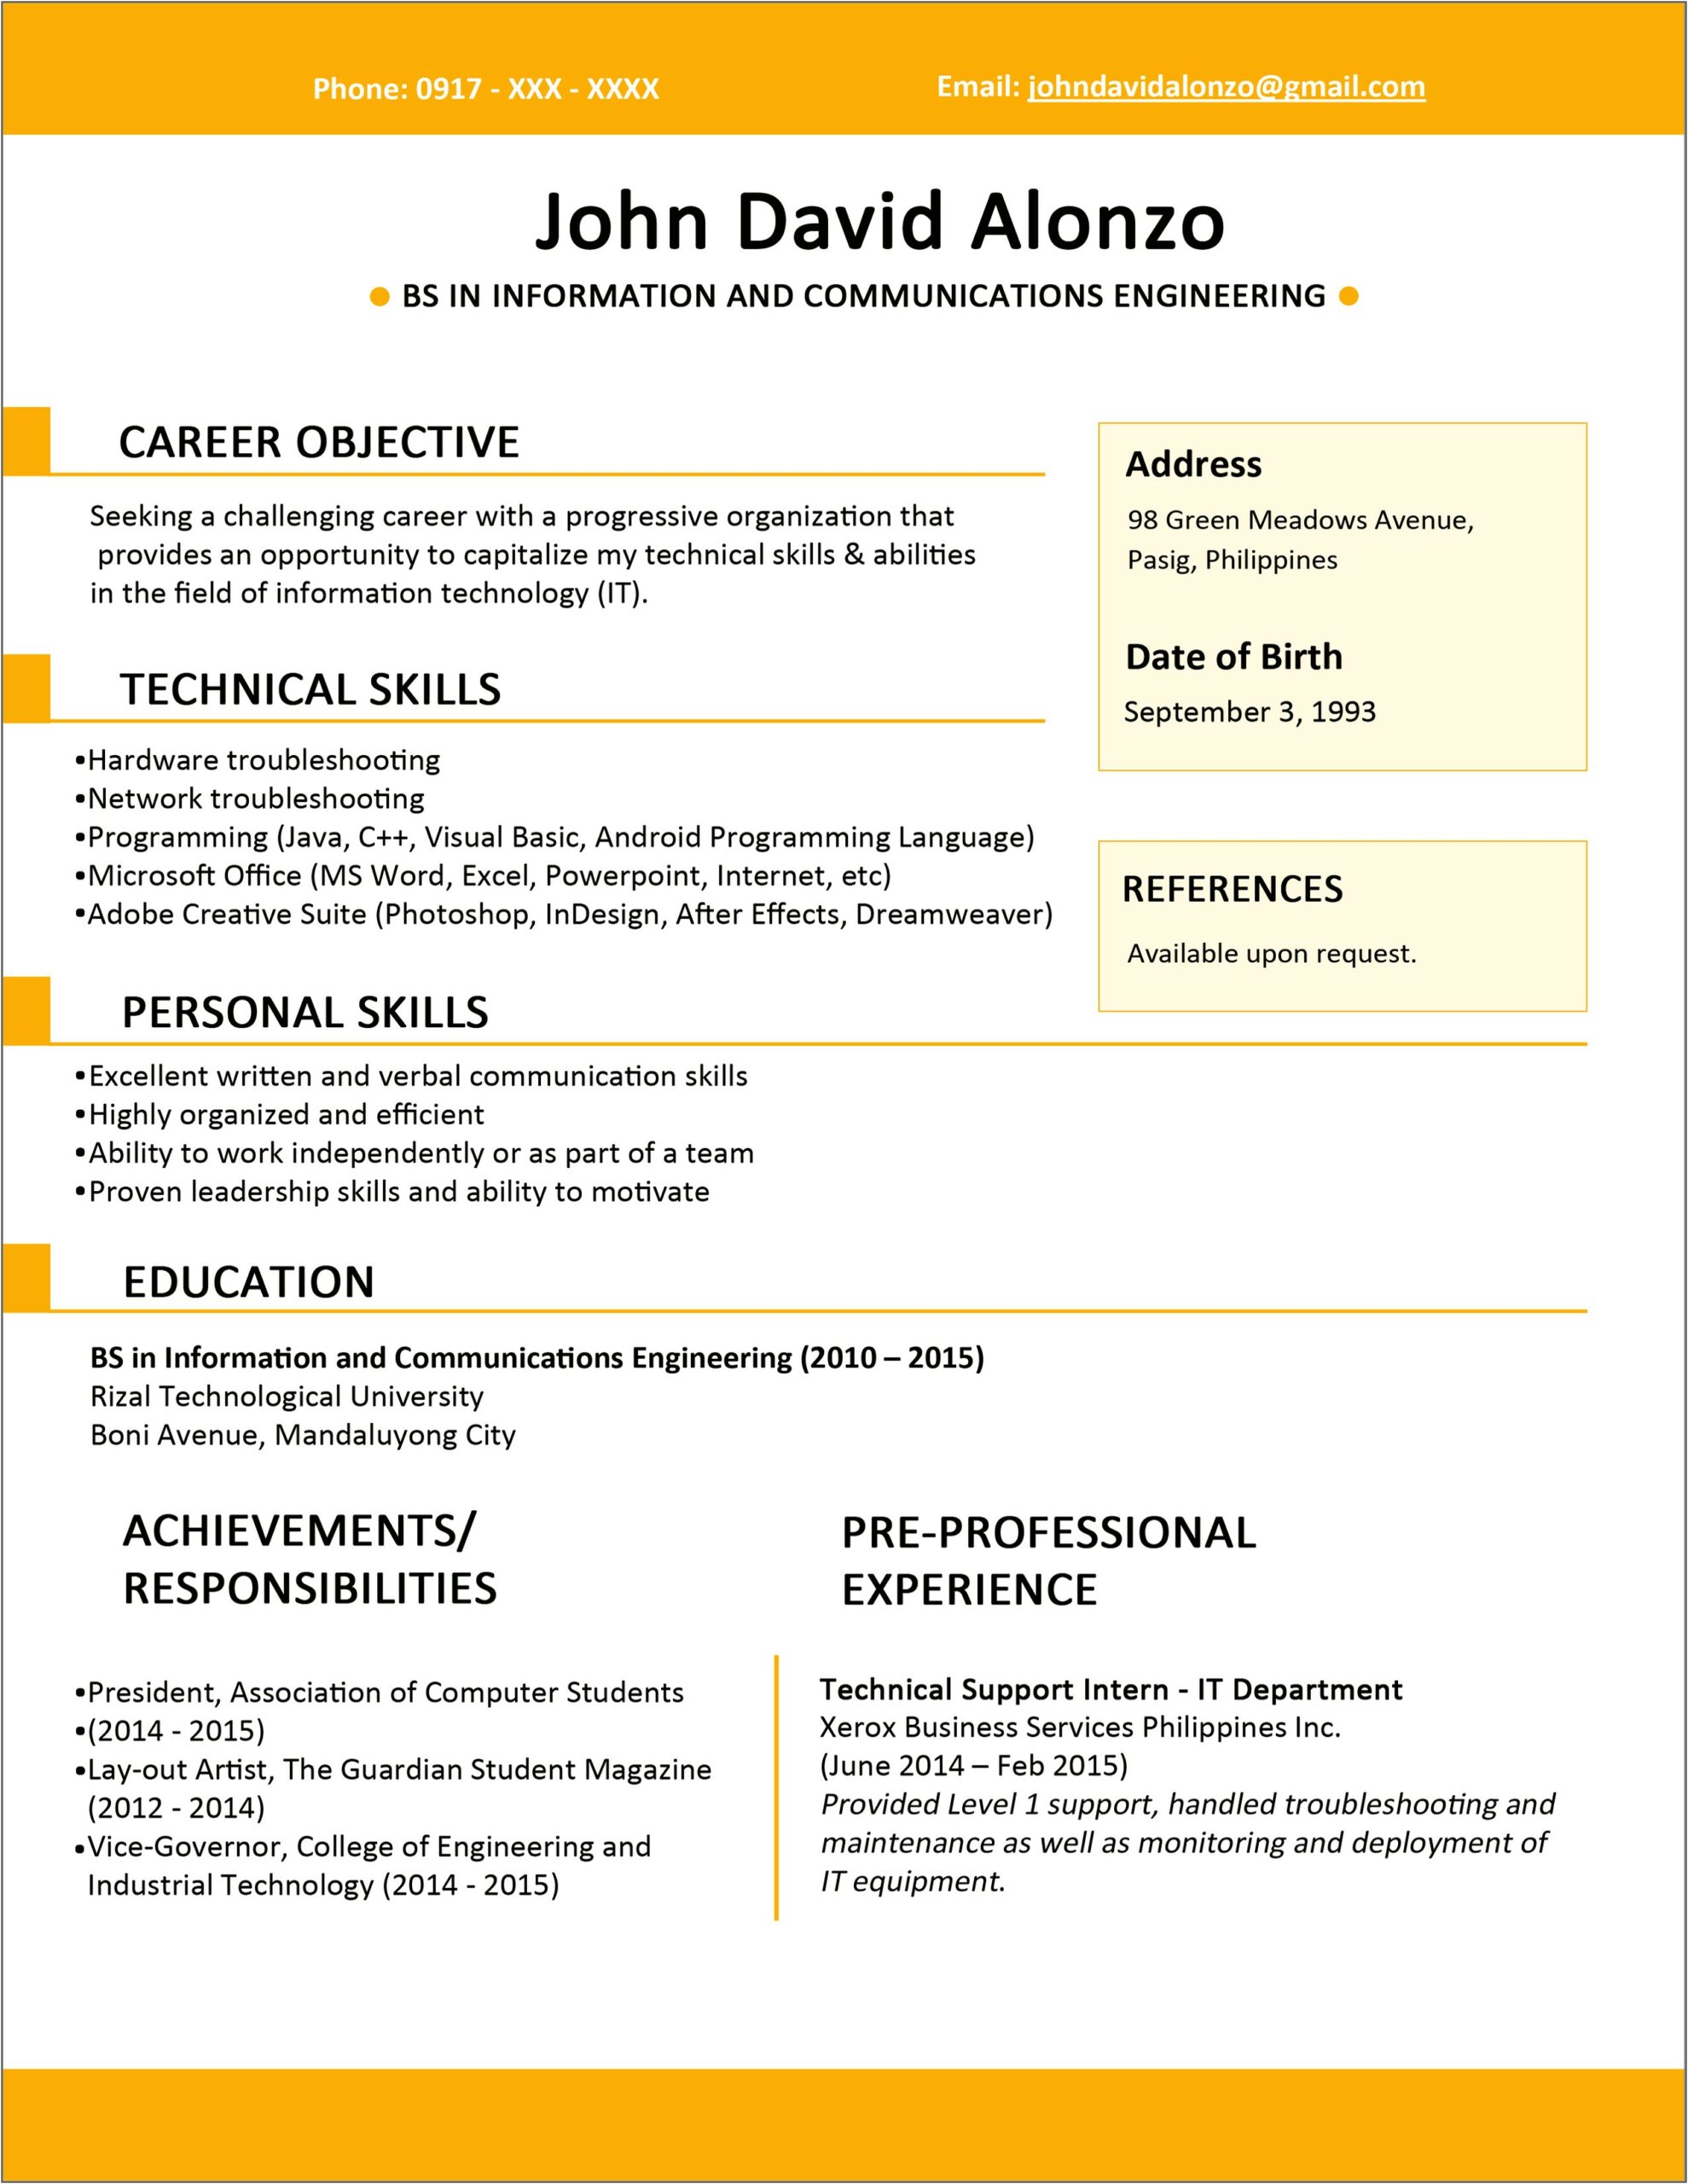 Resume Objective Statement Examples For Freshers